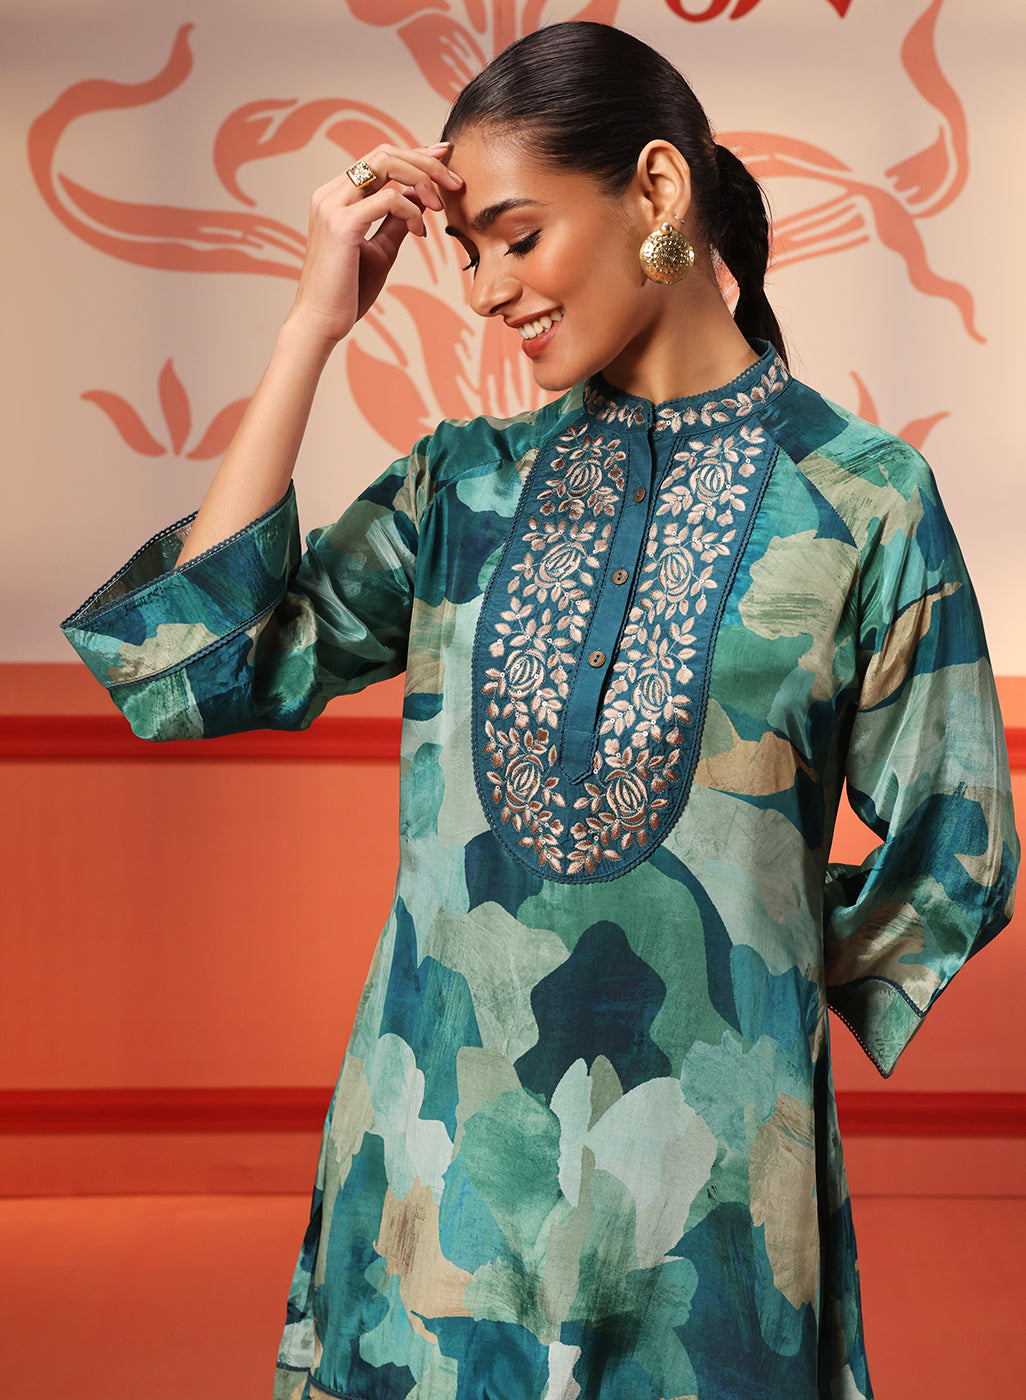 Kinza Blue Crepe Printed Long Top for Women